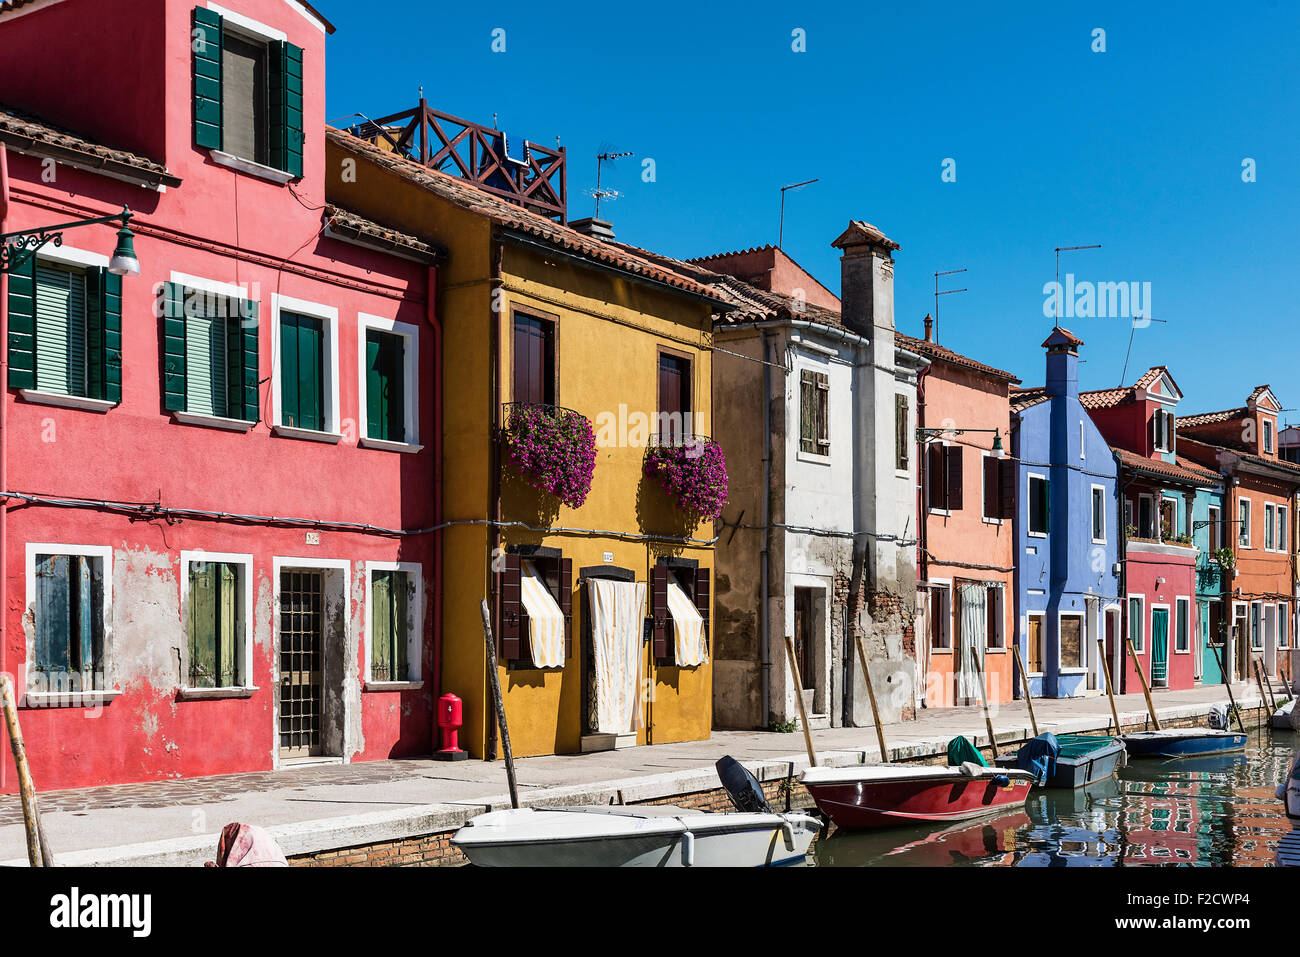 Colorful home facades in the Venetian fishing village island of Burano, Italy Stock Photo